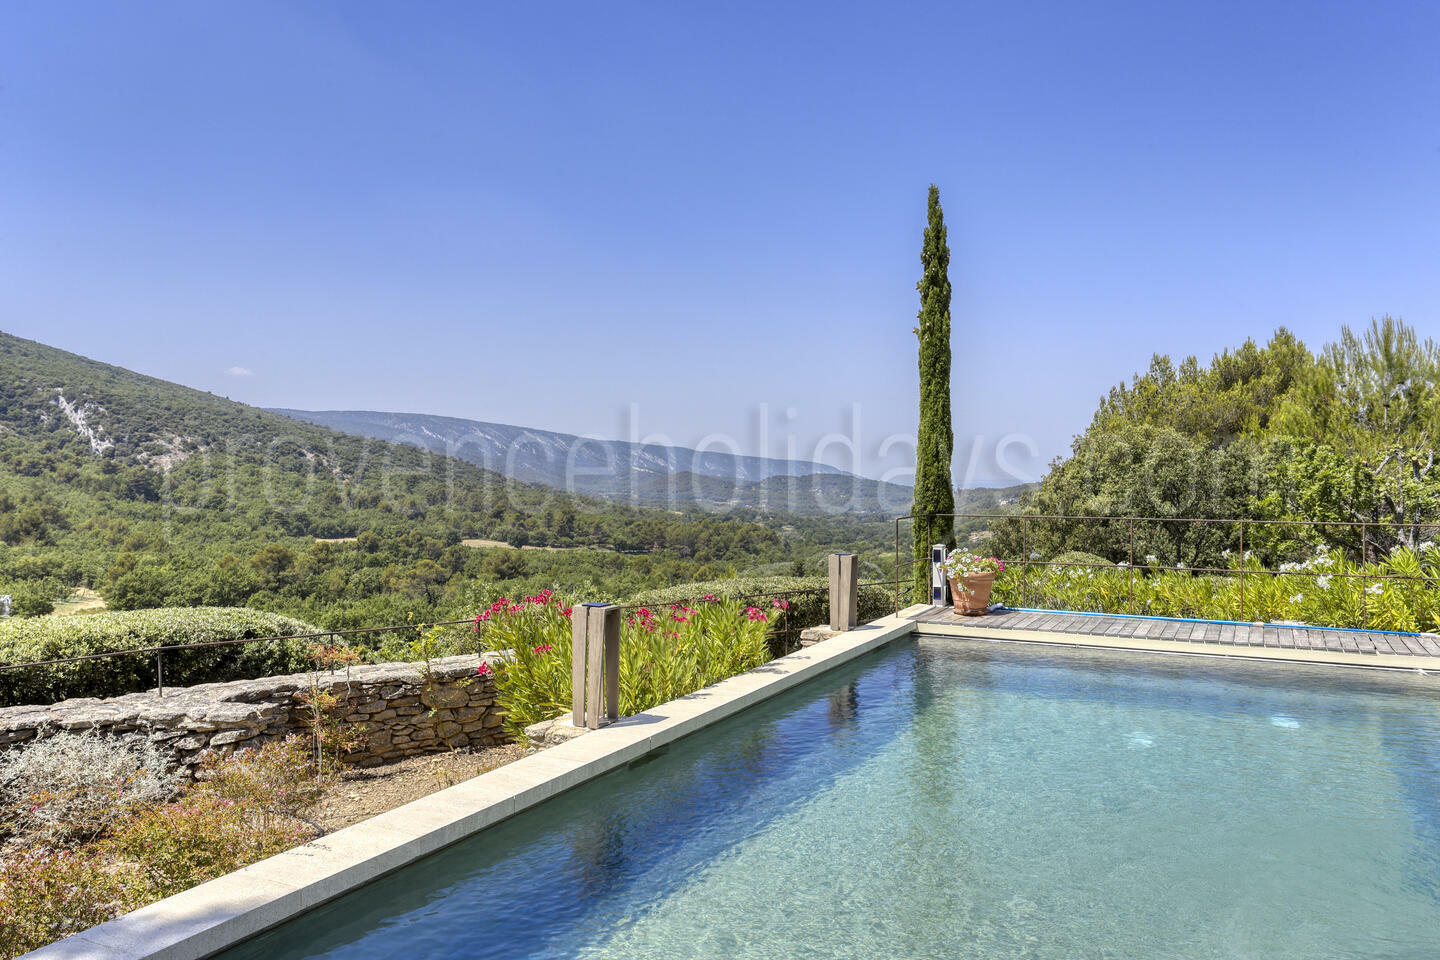 Superb property in the Luberon with panoramic view, air conditioning throughout and heated pool -1 - Mas de Capucine: Villa: Pool